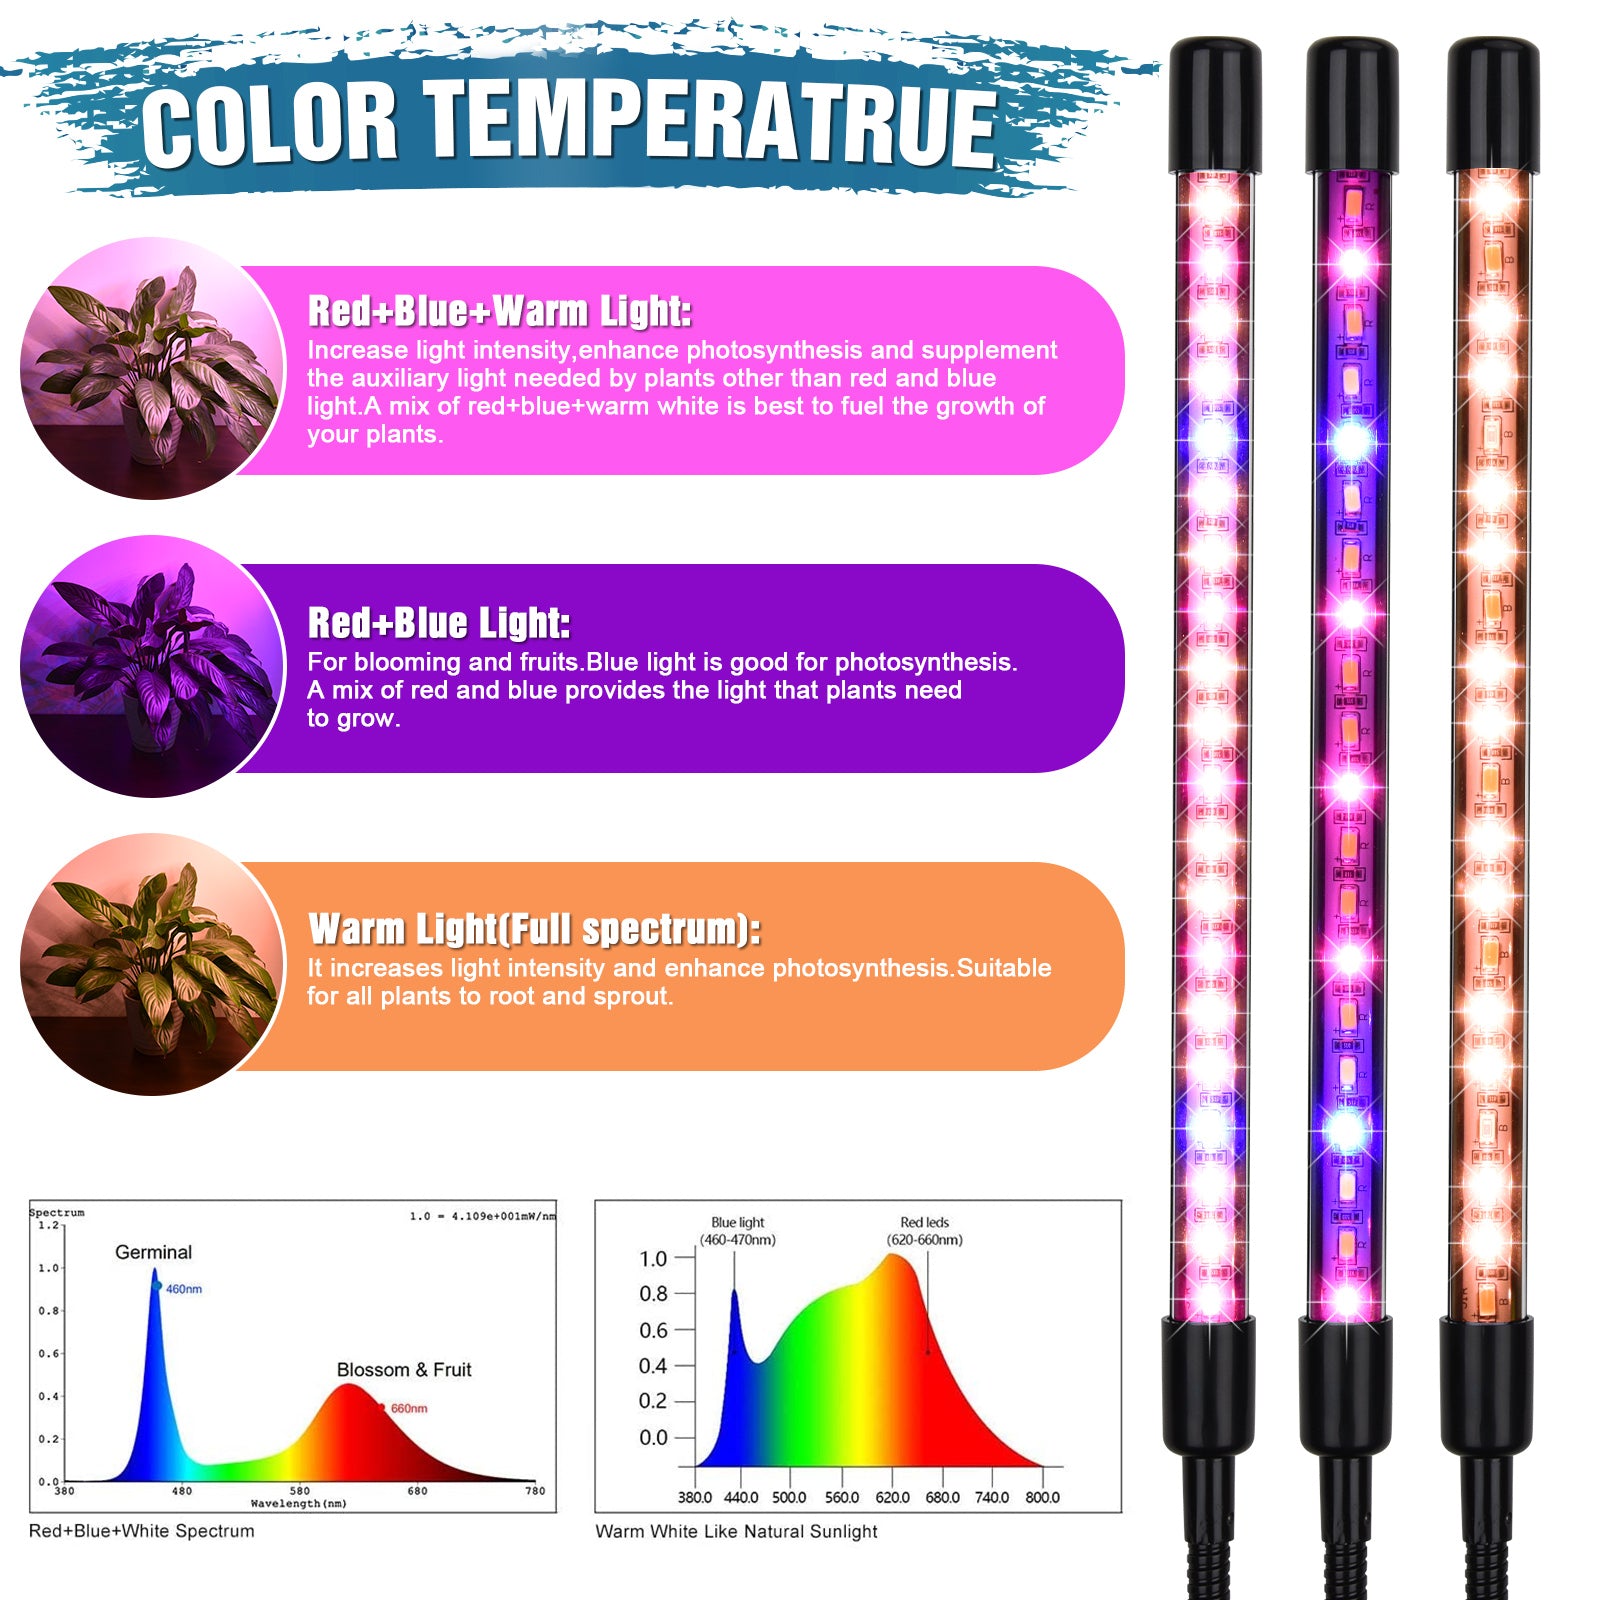 Upgraded 4-tube Long Strip Convenient Multi-purpose Indoor Fill Light Plug Plant Growth Light Potted Plant Light